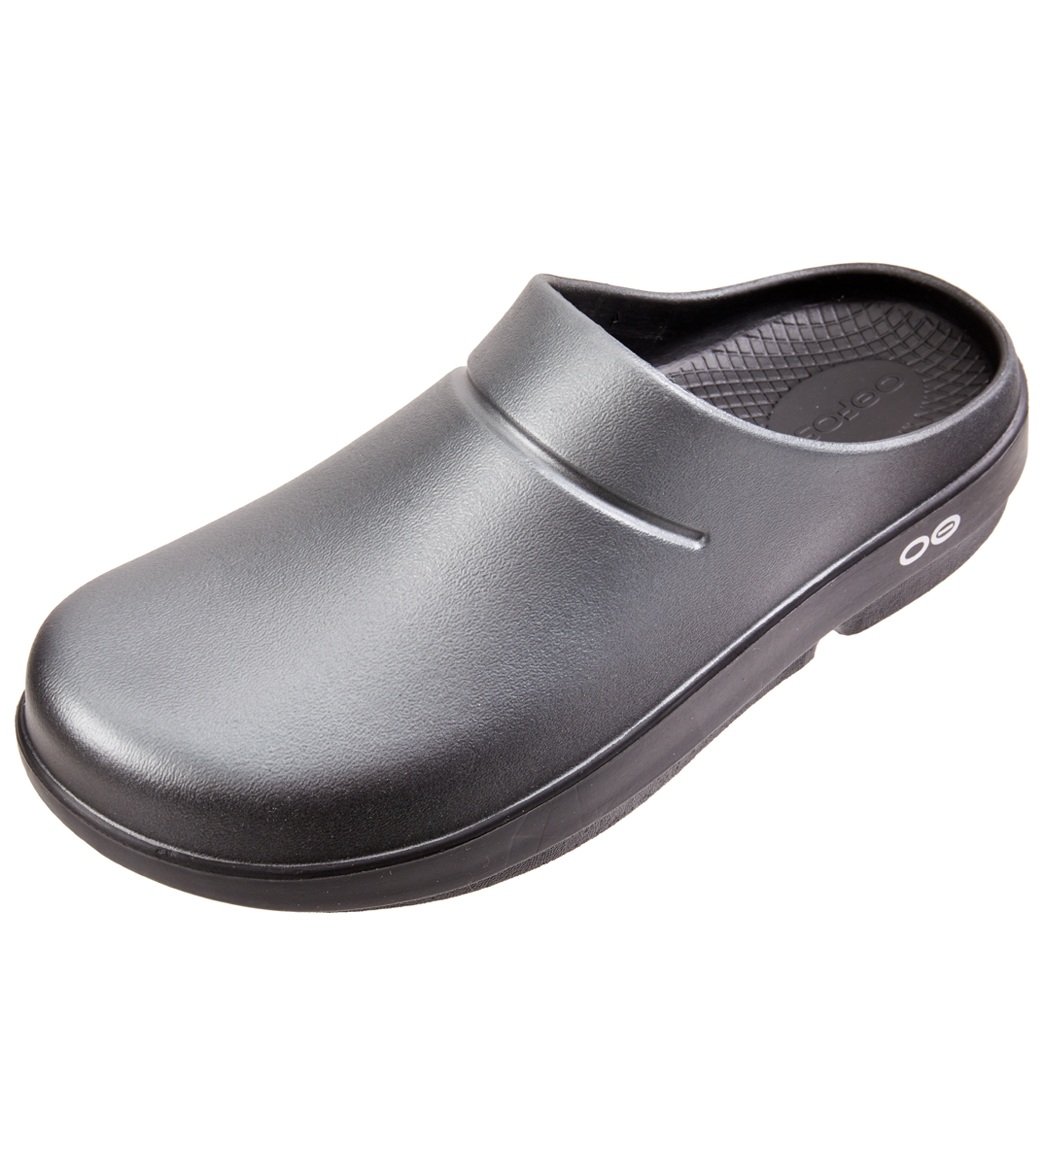 Oofos Unisex OOcloog Satin Clog at SwimOutlet.com - Free Shipping